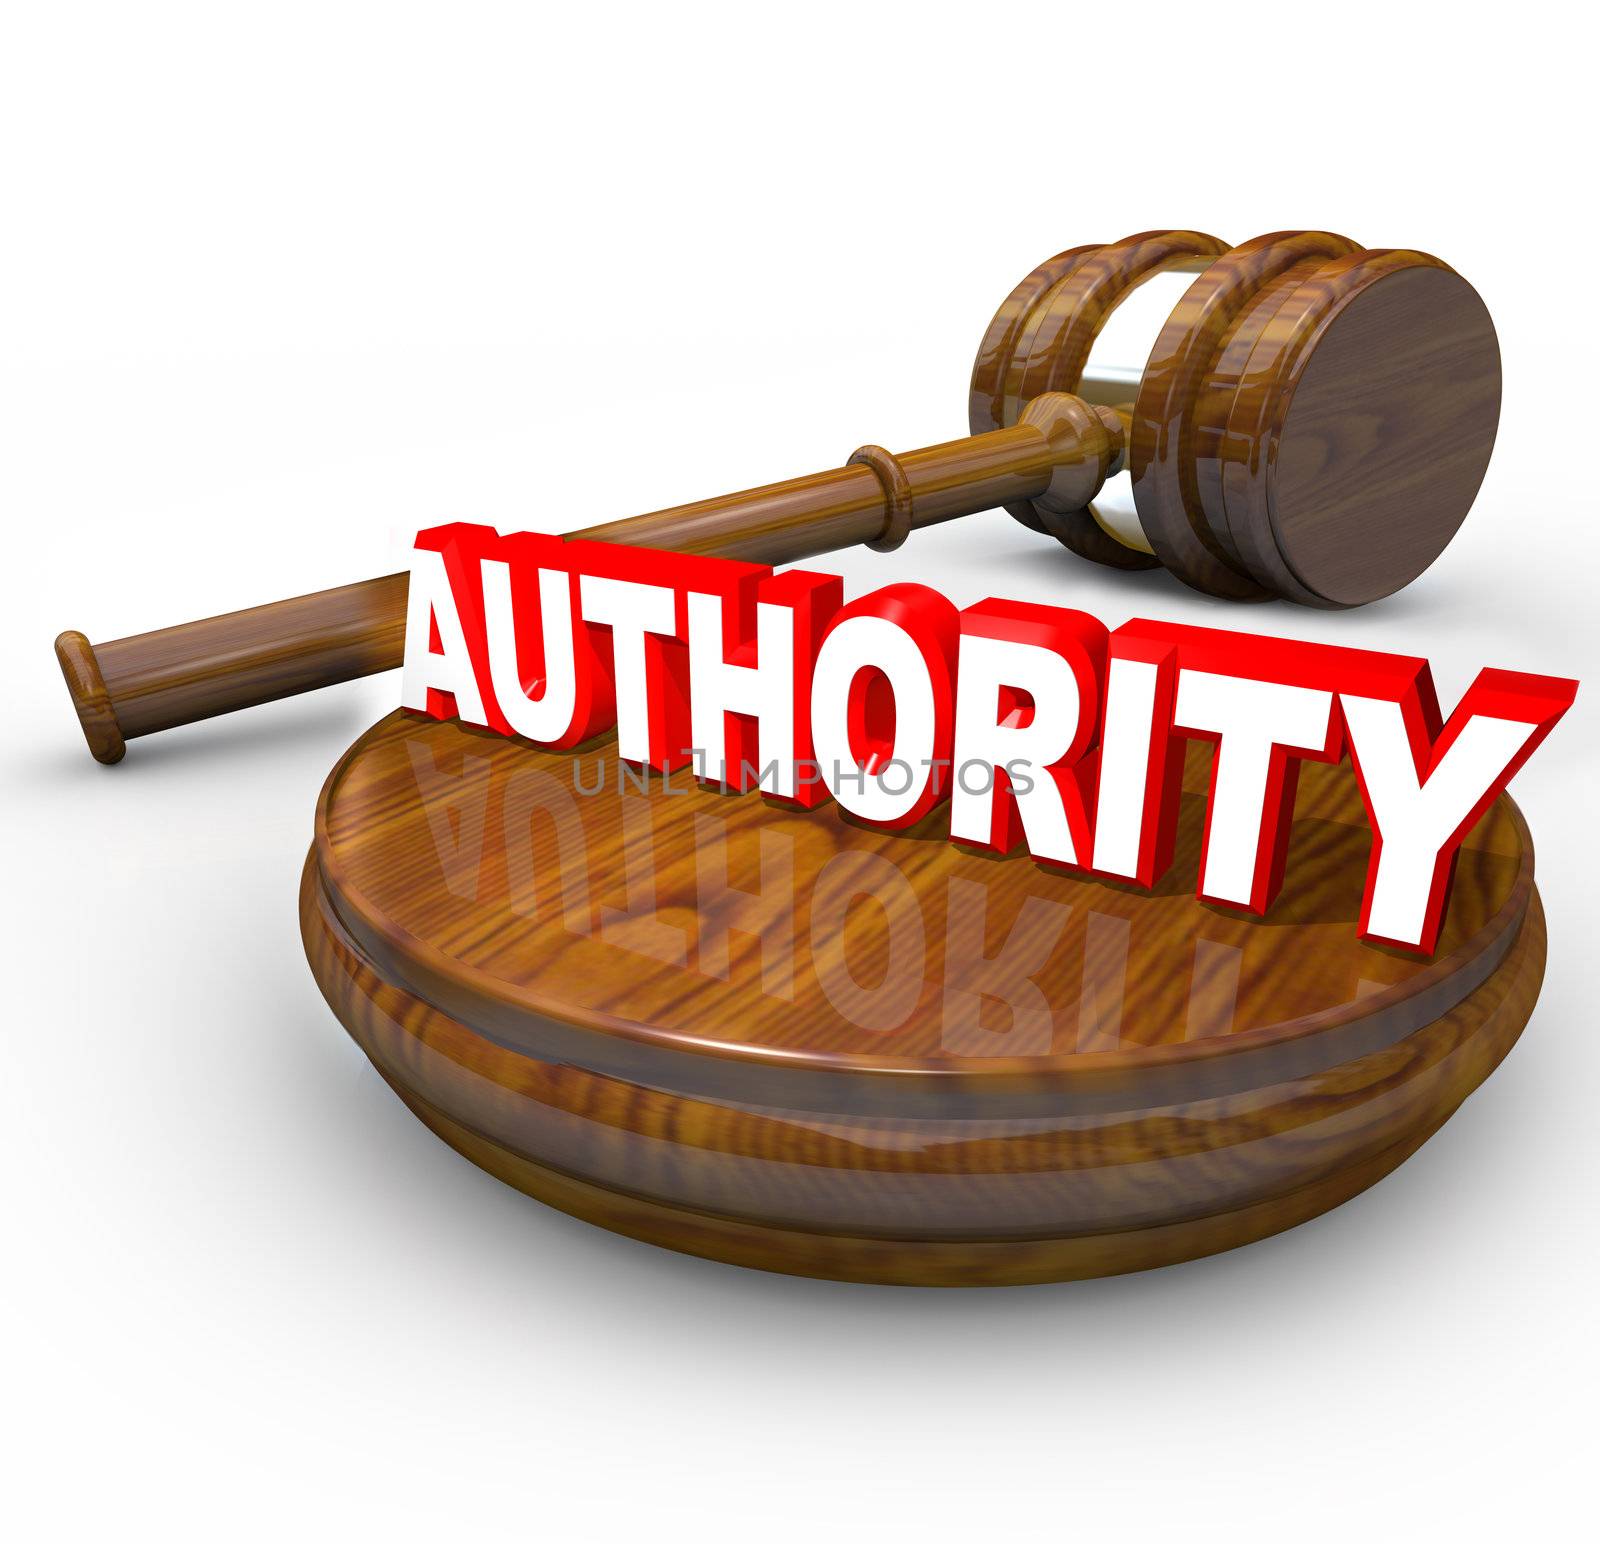 A judge's gavel and the word Authority symbolizing the control exercised by a person in a superior role to make final decisions